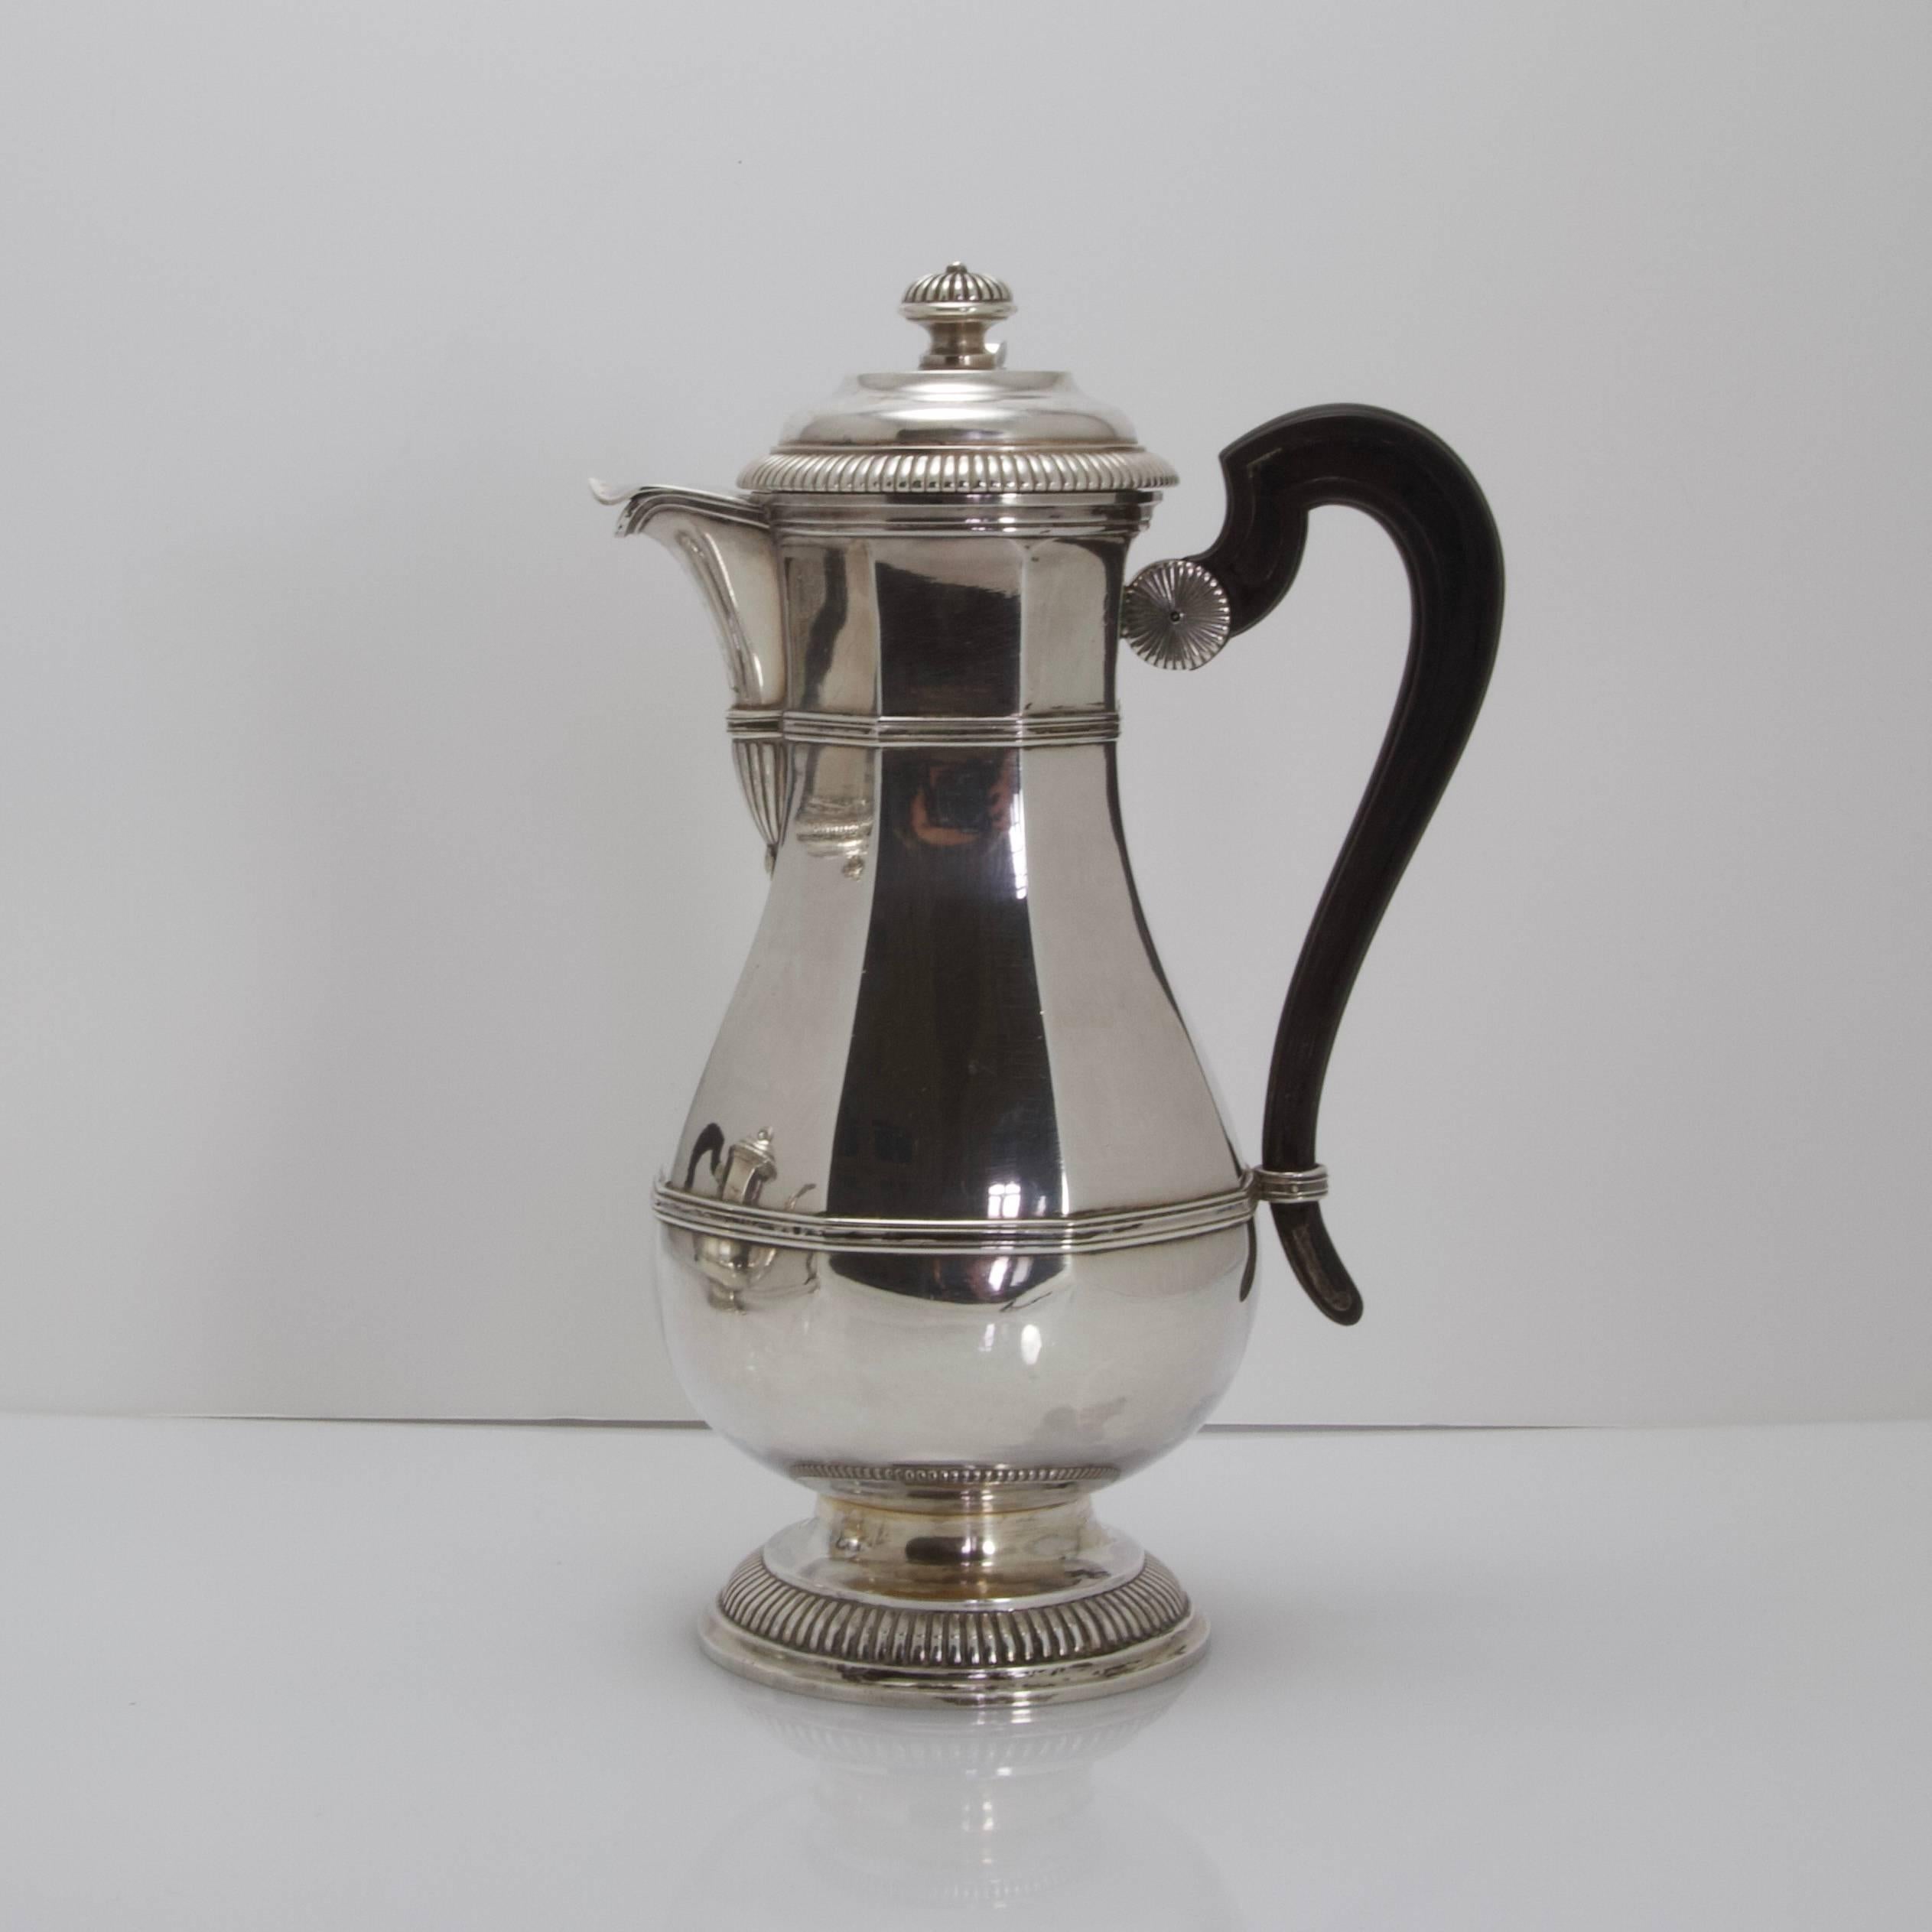 19th Century Regency Style Antique Sterling Silver Tea and Coffee Set by Cardeilhac For Sale